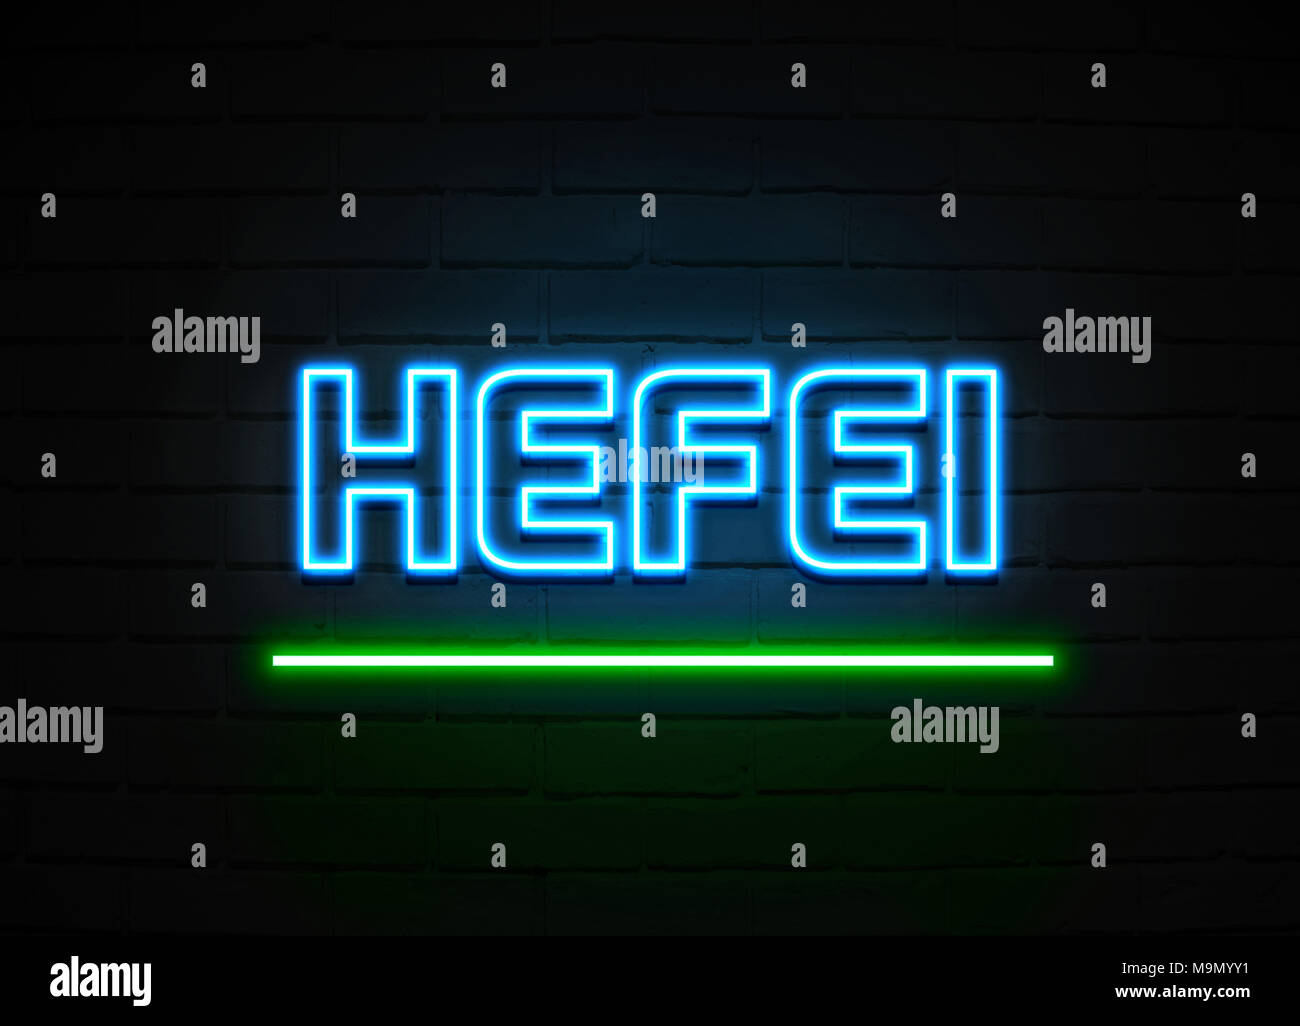 Hefei neon sign - Glowing Neon Sign on brickwall wall - 3D rendered royalty free stock illustration. Stock Photo